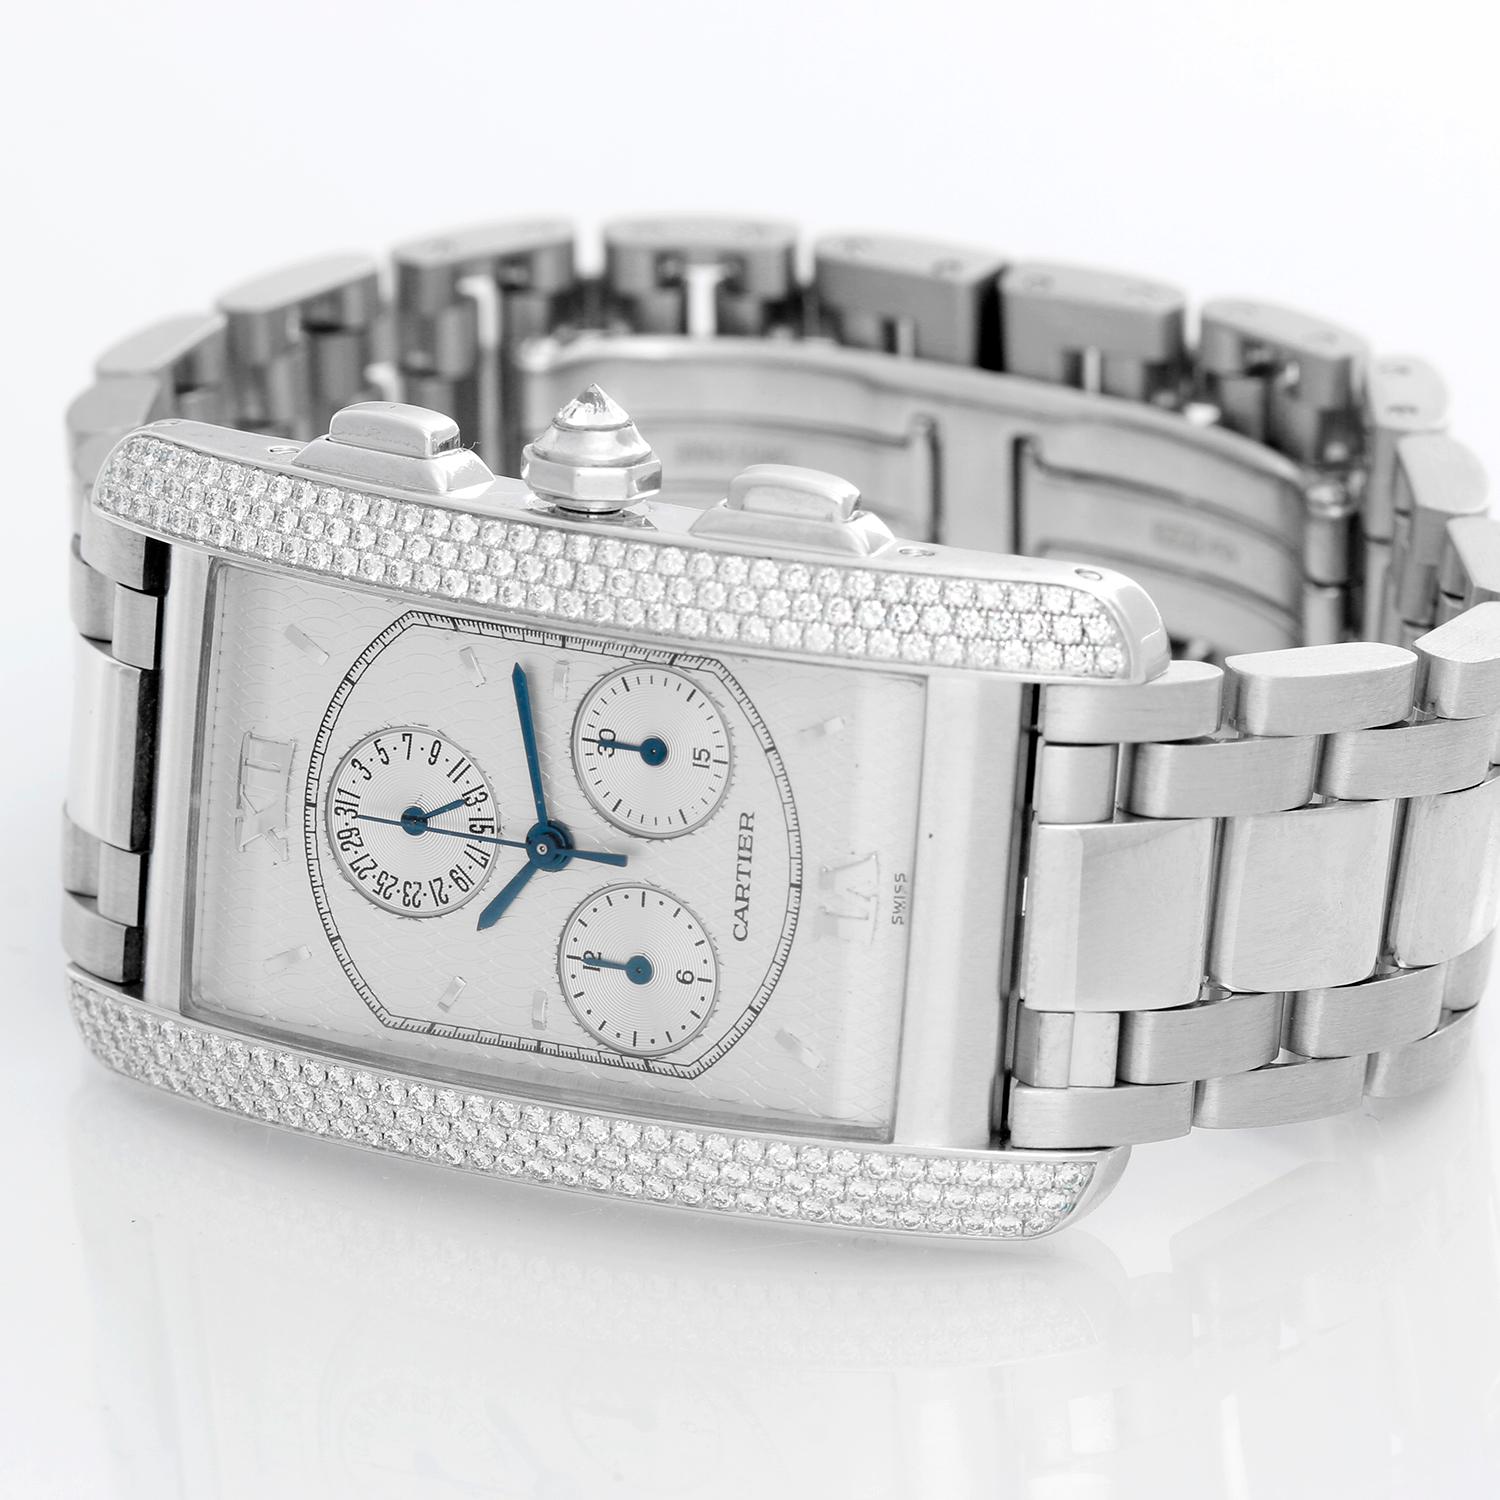 Cartier Tank Americaine Chronograph Men's/Ladies 18k White Gold Diamond Watch - Quartz chronograph with date. 18k white gold rectangular style case (26mm x 45mm). Cartier motif dial with with raised silver stick hour markers ; date; hour minutes and